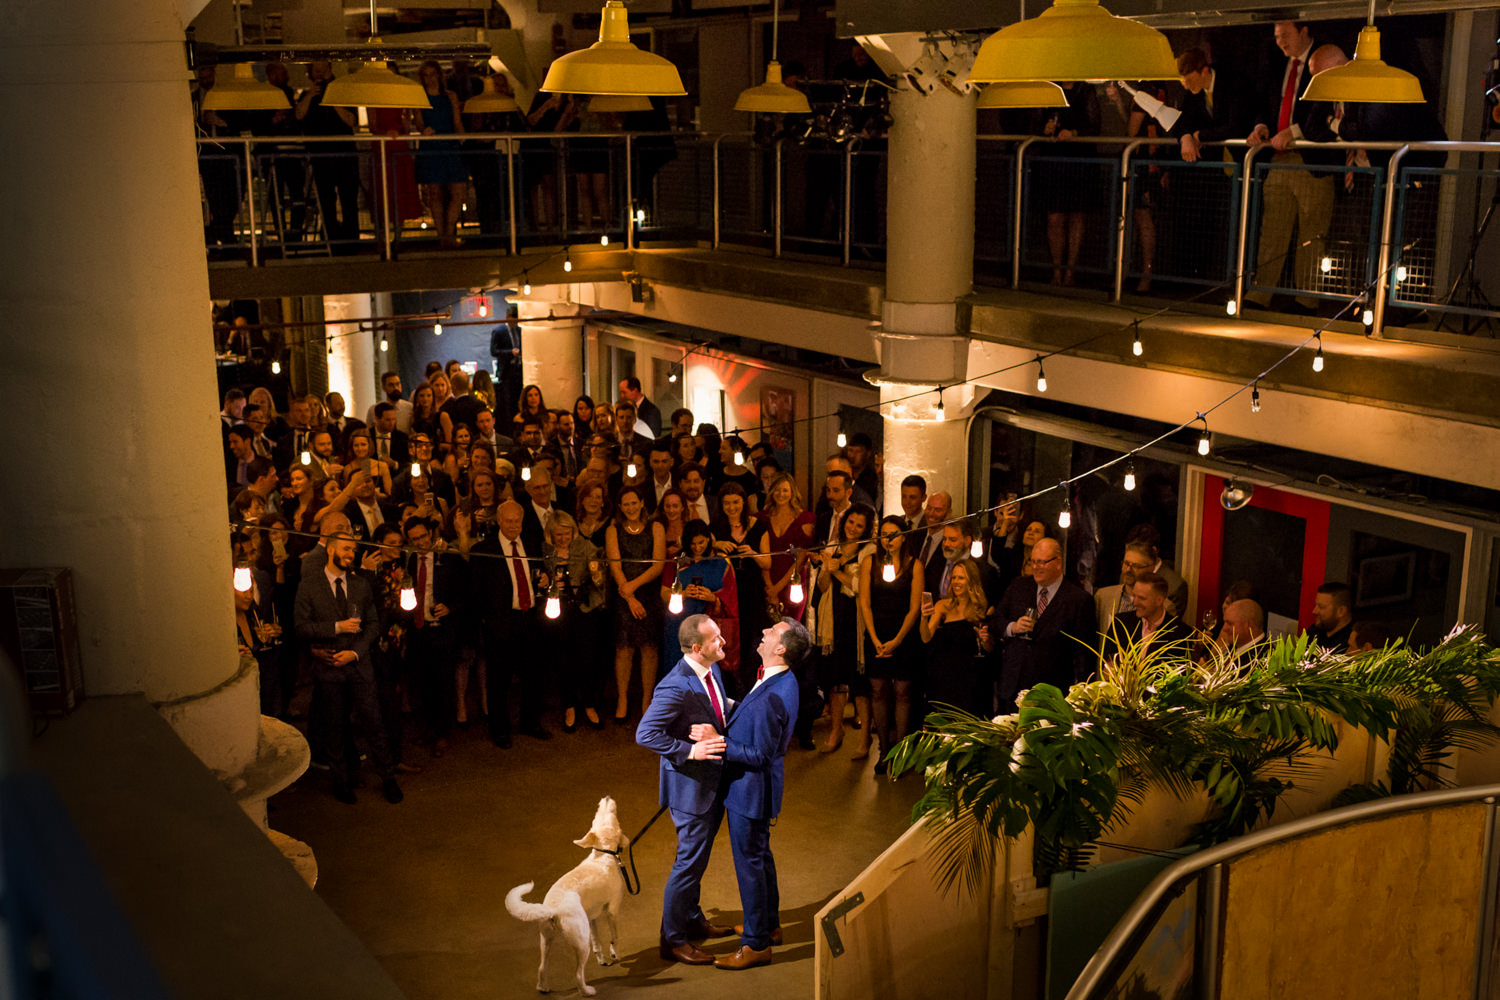 this wedding was at the Torpedo Factory in Alexandria, Virginia, This photo was featured on Fearless Photographers and also won a World's Best Wedding Photography Award, the photo shows two grooms at their first dance, I photographed it from a second level of the building so you can see the crowd of people behind and around them on two levels, their pup was with them, they did their first dance with their dog, dogs at weddings, gay wedding, two grooms, laughing and having a great time on their first dance, Procopio Photography, best top Washington DC photographer, best top Maryland photographer, best top Virginia photographer, best top DMV photographer, best top wedding photographer, best top commercial photographer, best top portrait photographer, best top boudoir photographer, modern fine art portraits, dramatic, unique, different, bold, editorial, photojournalism, award winning photographer, published photographer, memorable images, be different, stand out